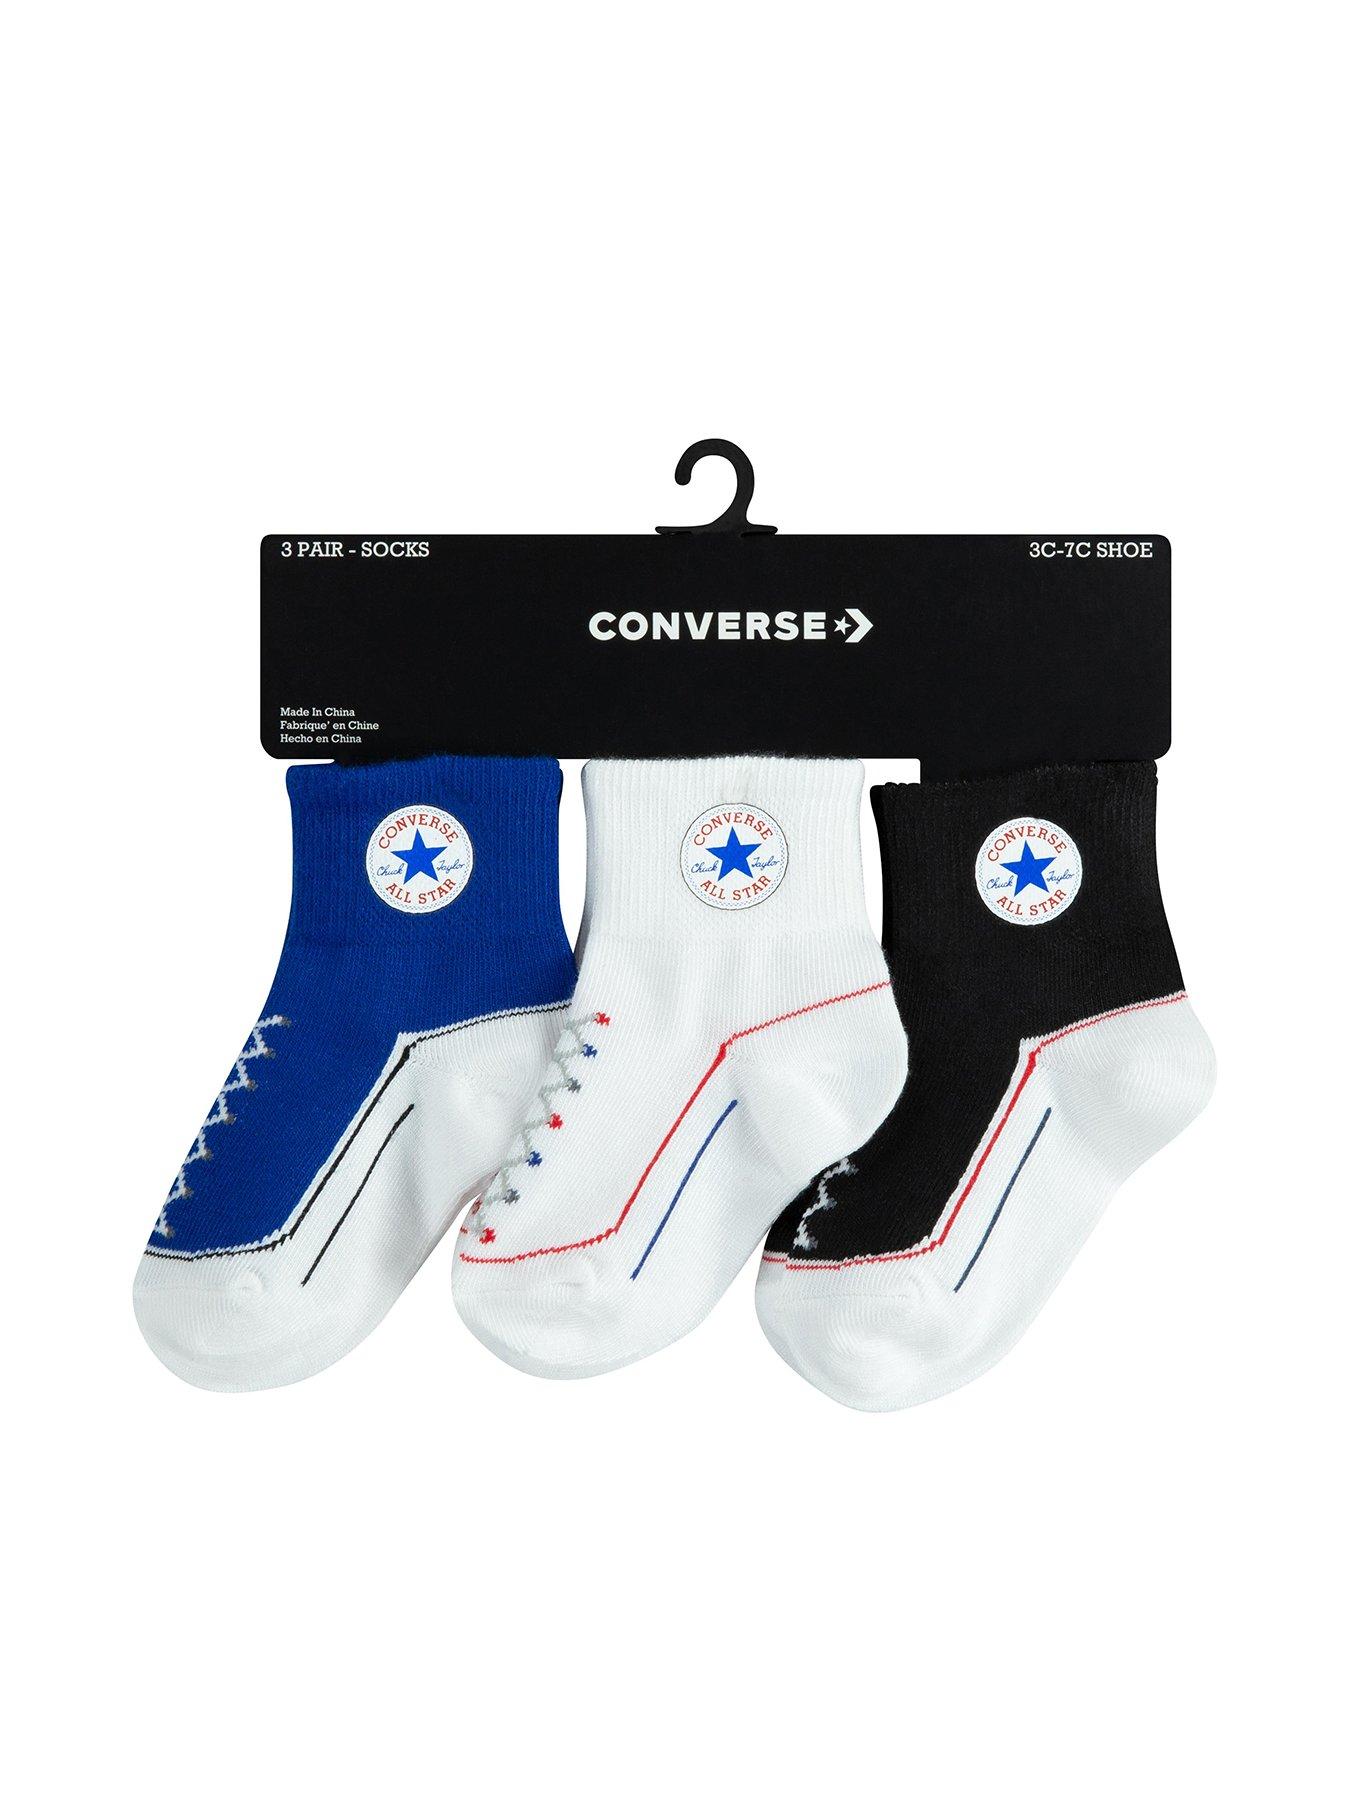 2022 Top-Selling | Converse Younger Chuck Infant Quarter Toddler 61% Up 3pk Sales